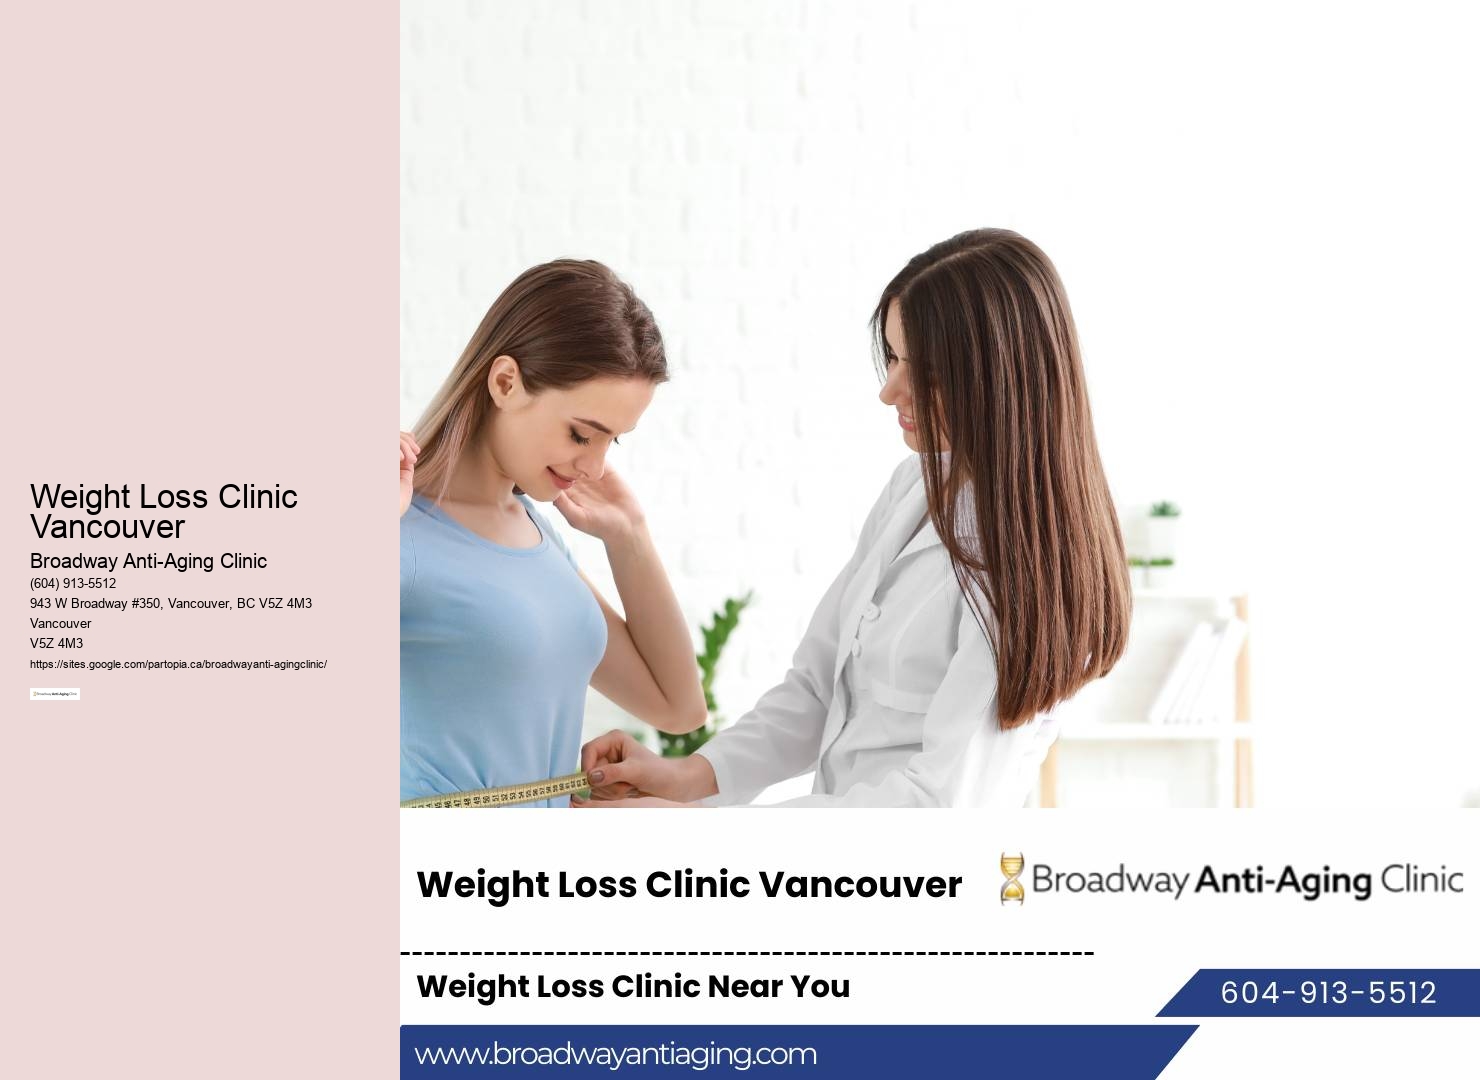 Medical Weight Loss Vancouver